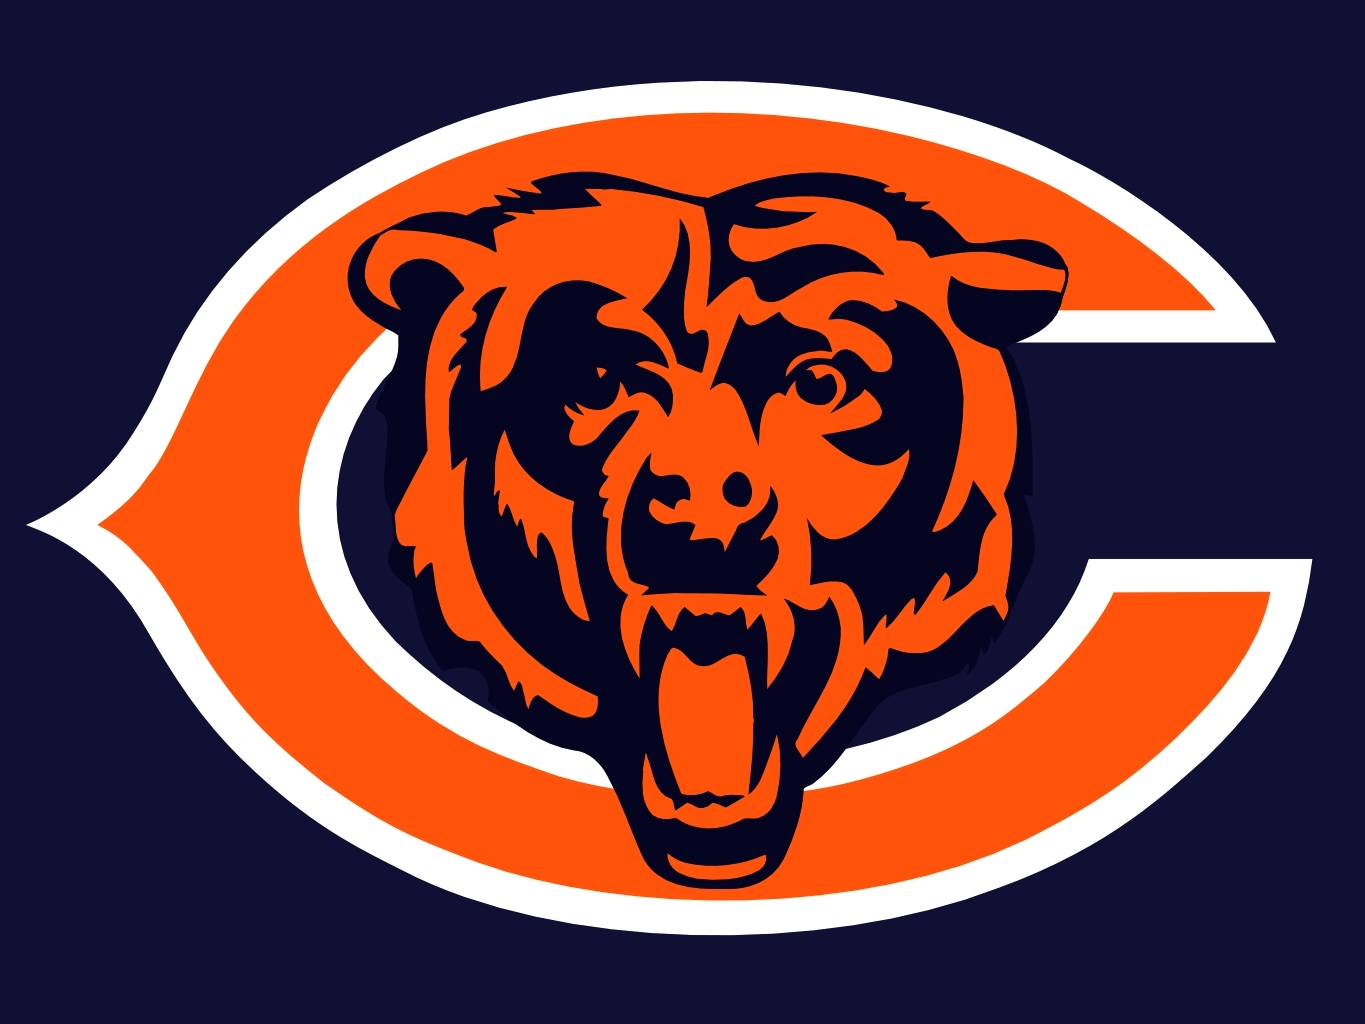 Chicago Bears 2 Corn Hole Stickers set of (2)